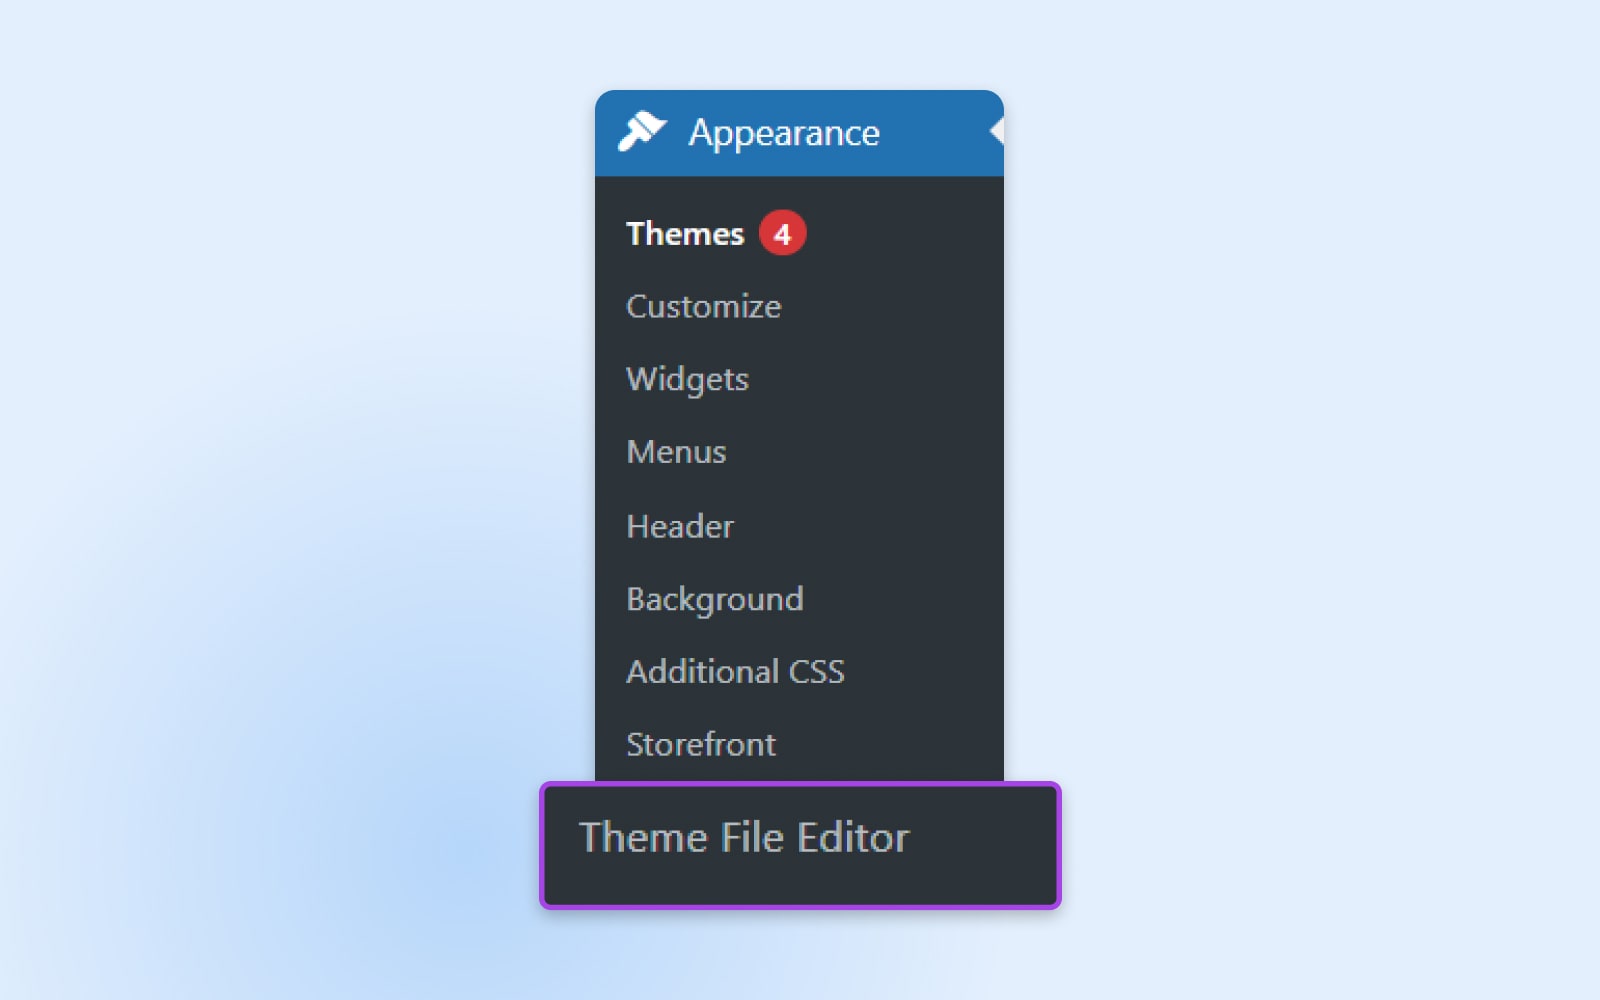 screenshot of the "appearance" drop down menu in WP showing "theme file editor" on the bottom